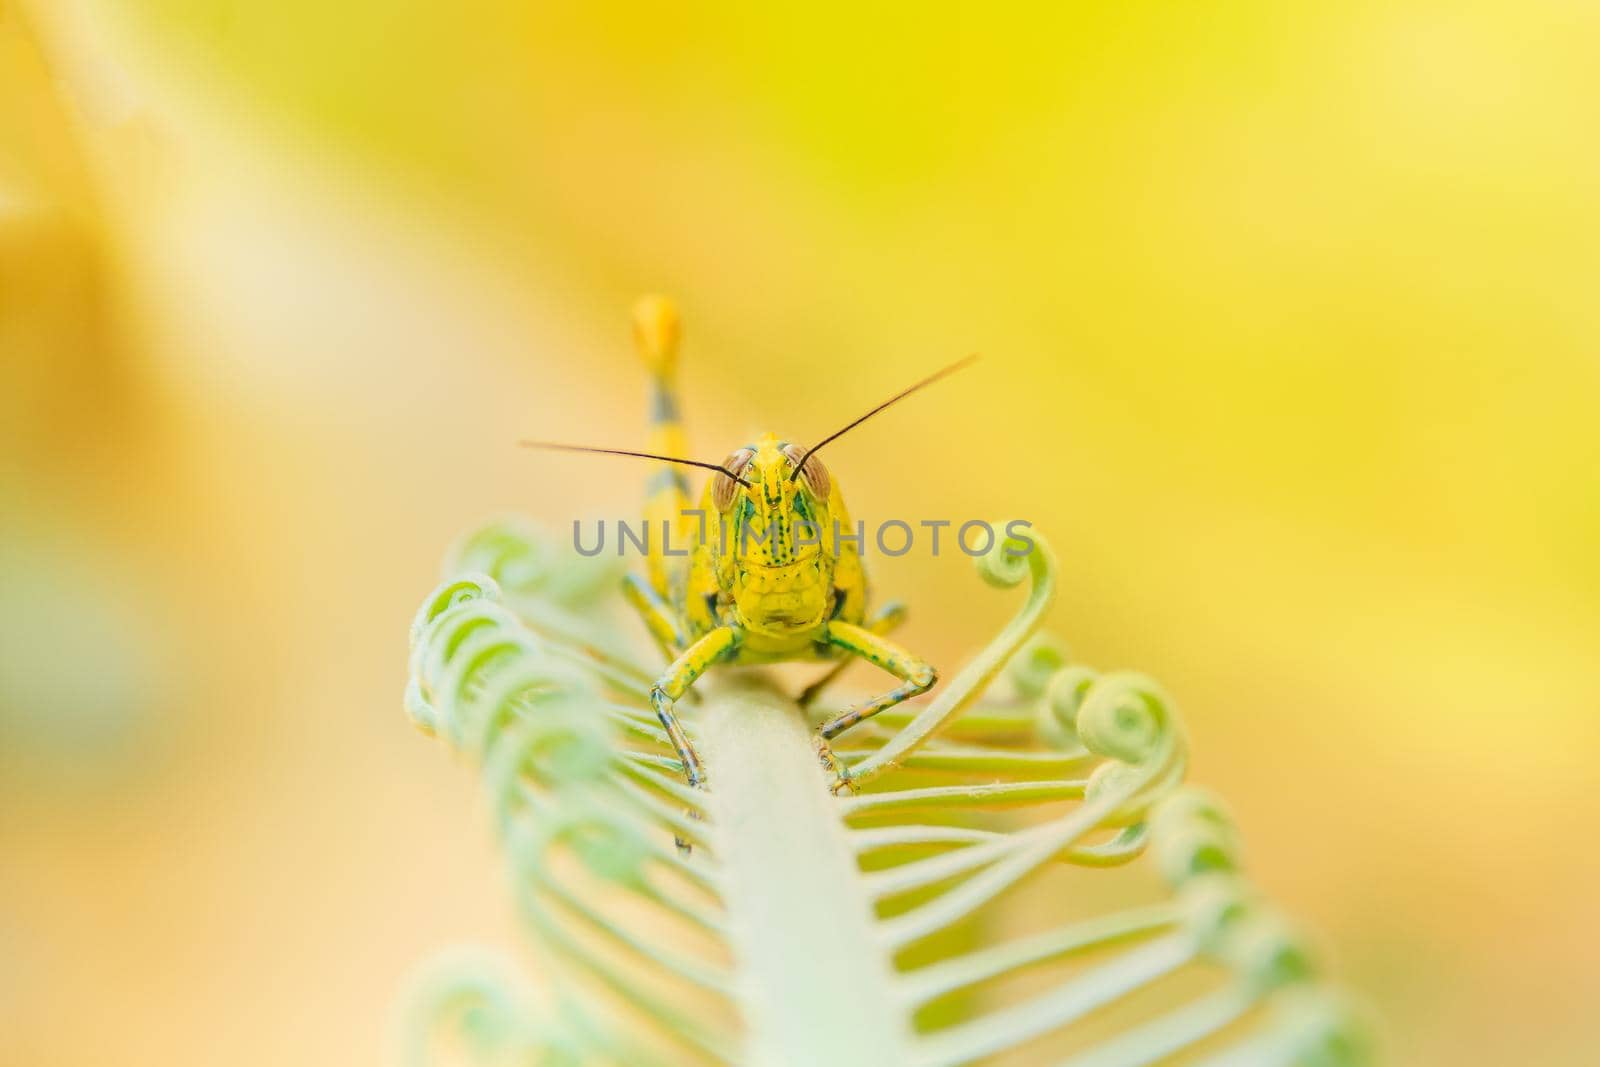 grasshopper yellow on branch of trees with copy space add text select focus with shallow depth of field.